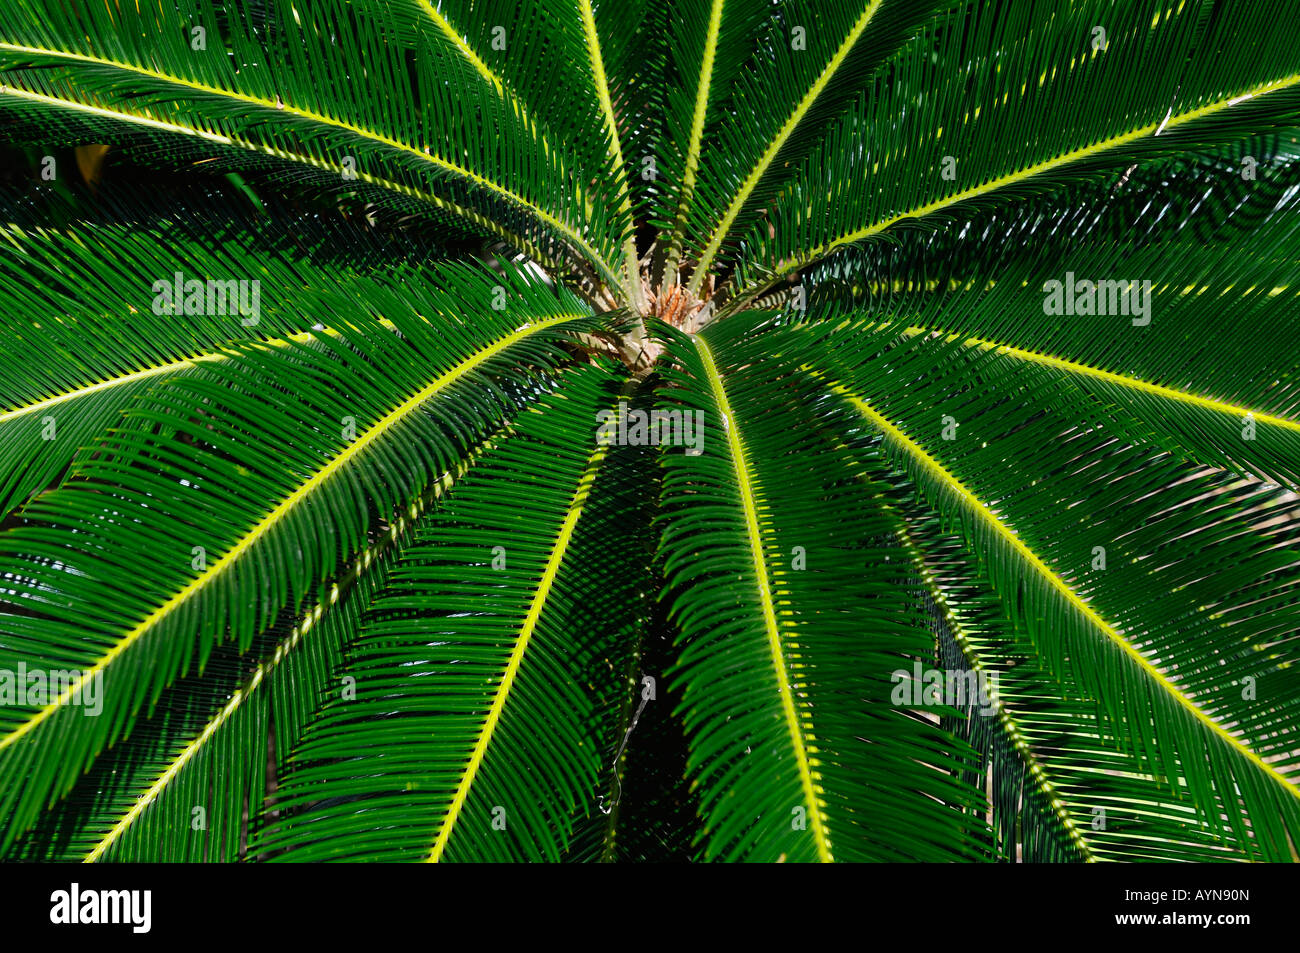 Green whorl of cycad frond leaves in full tropical sun Costa Rica Stock Photo